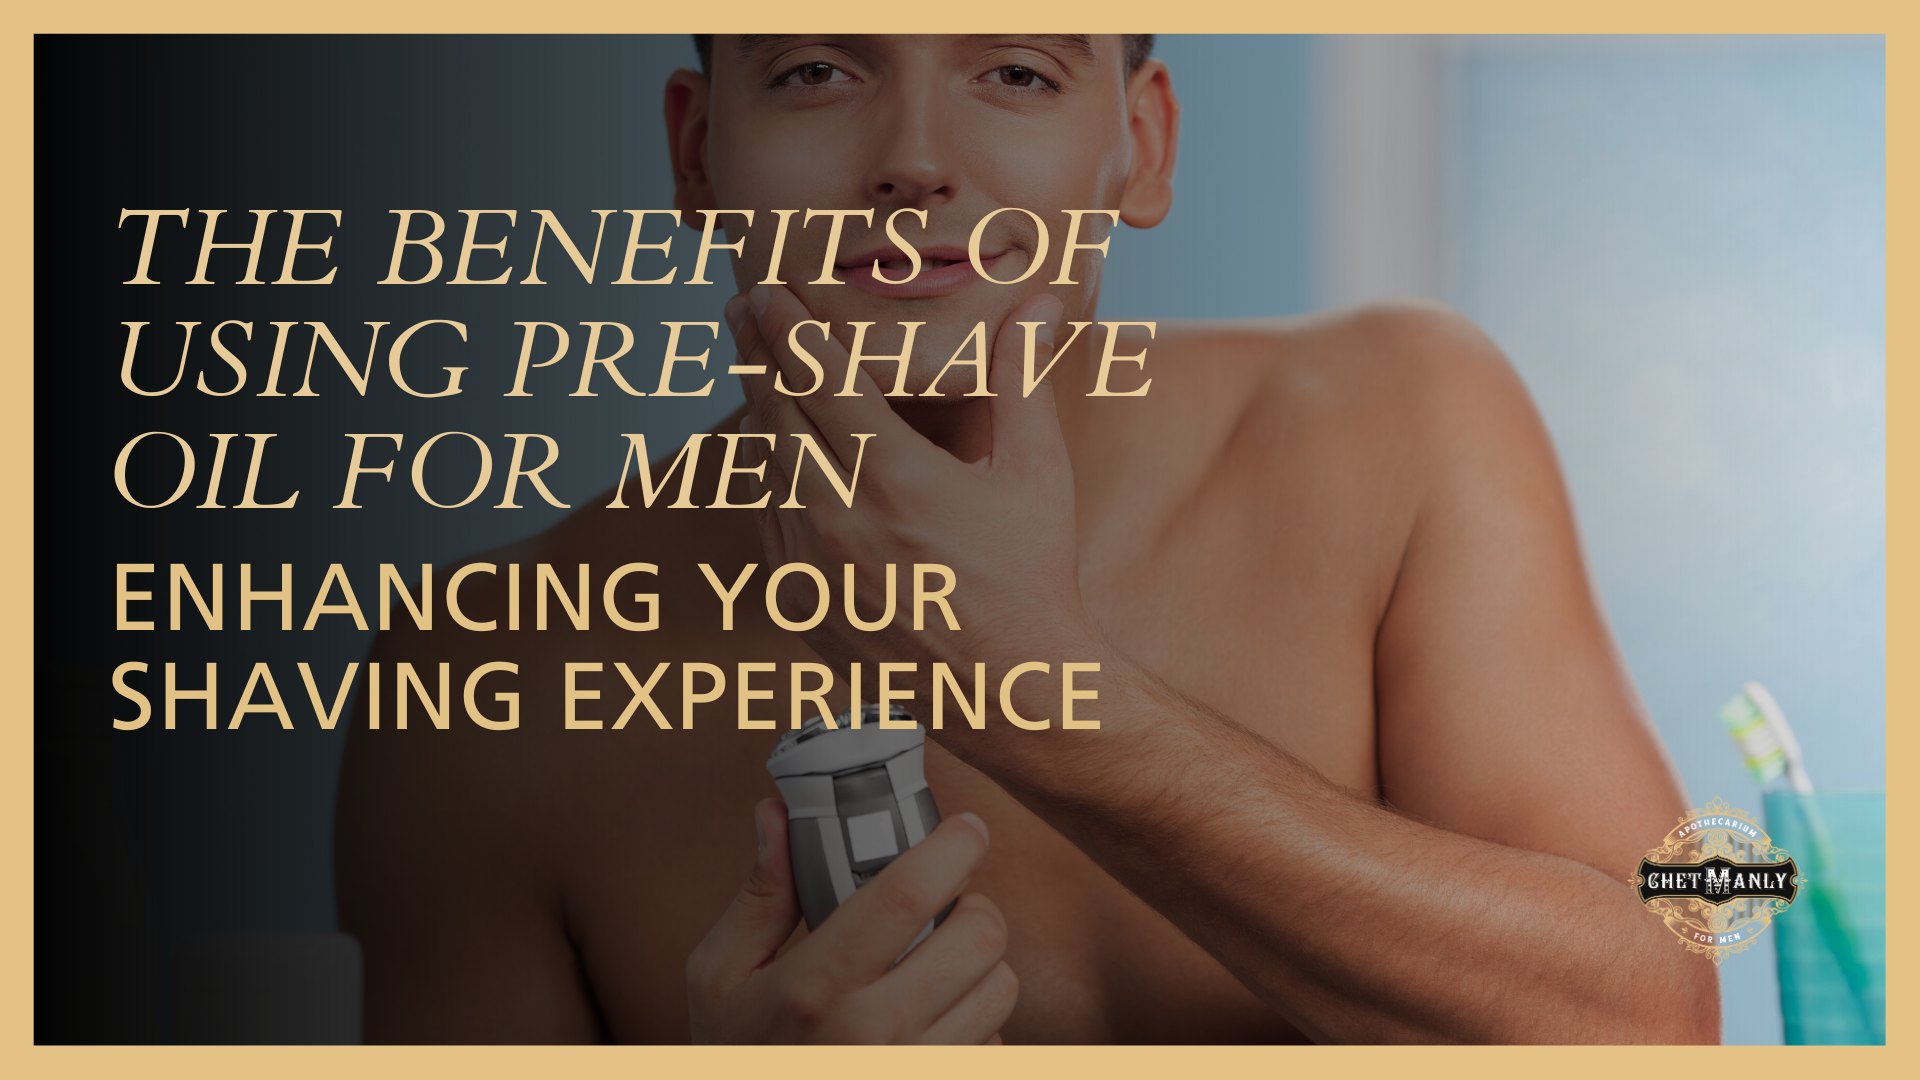 The Benefits of Using Pre-Shave Oil for Men: Enhancing Your Shaving Experience